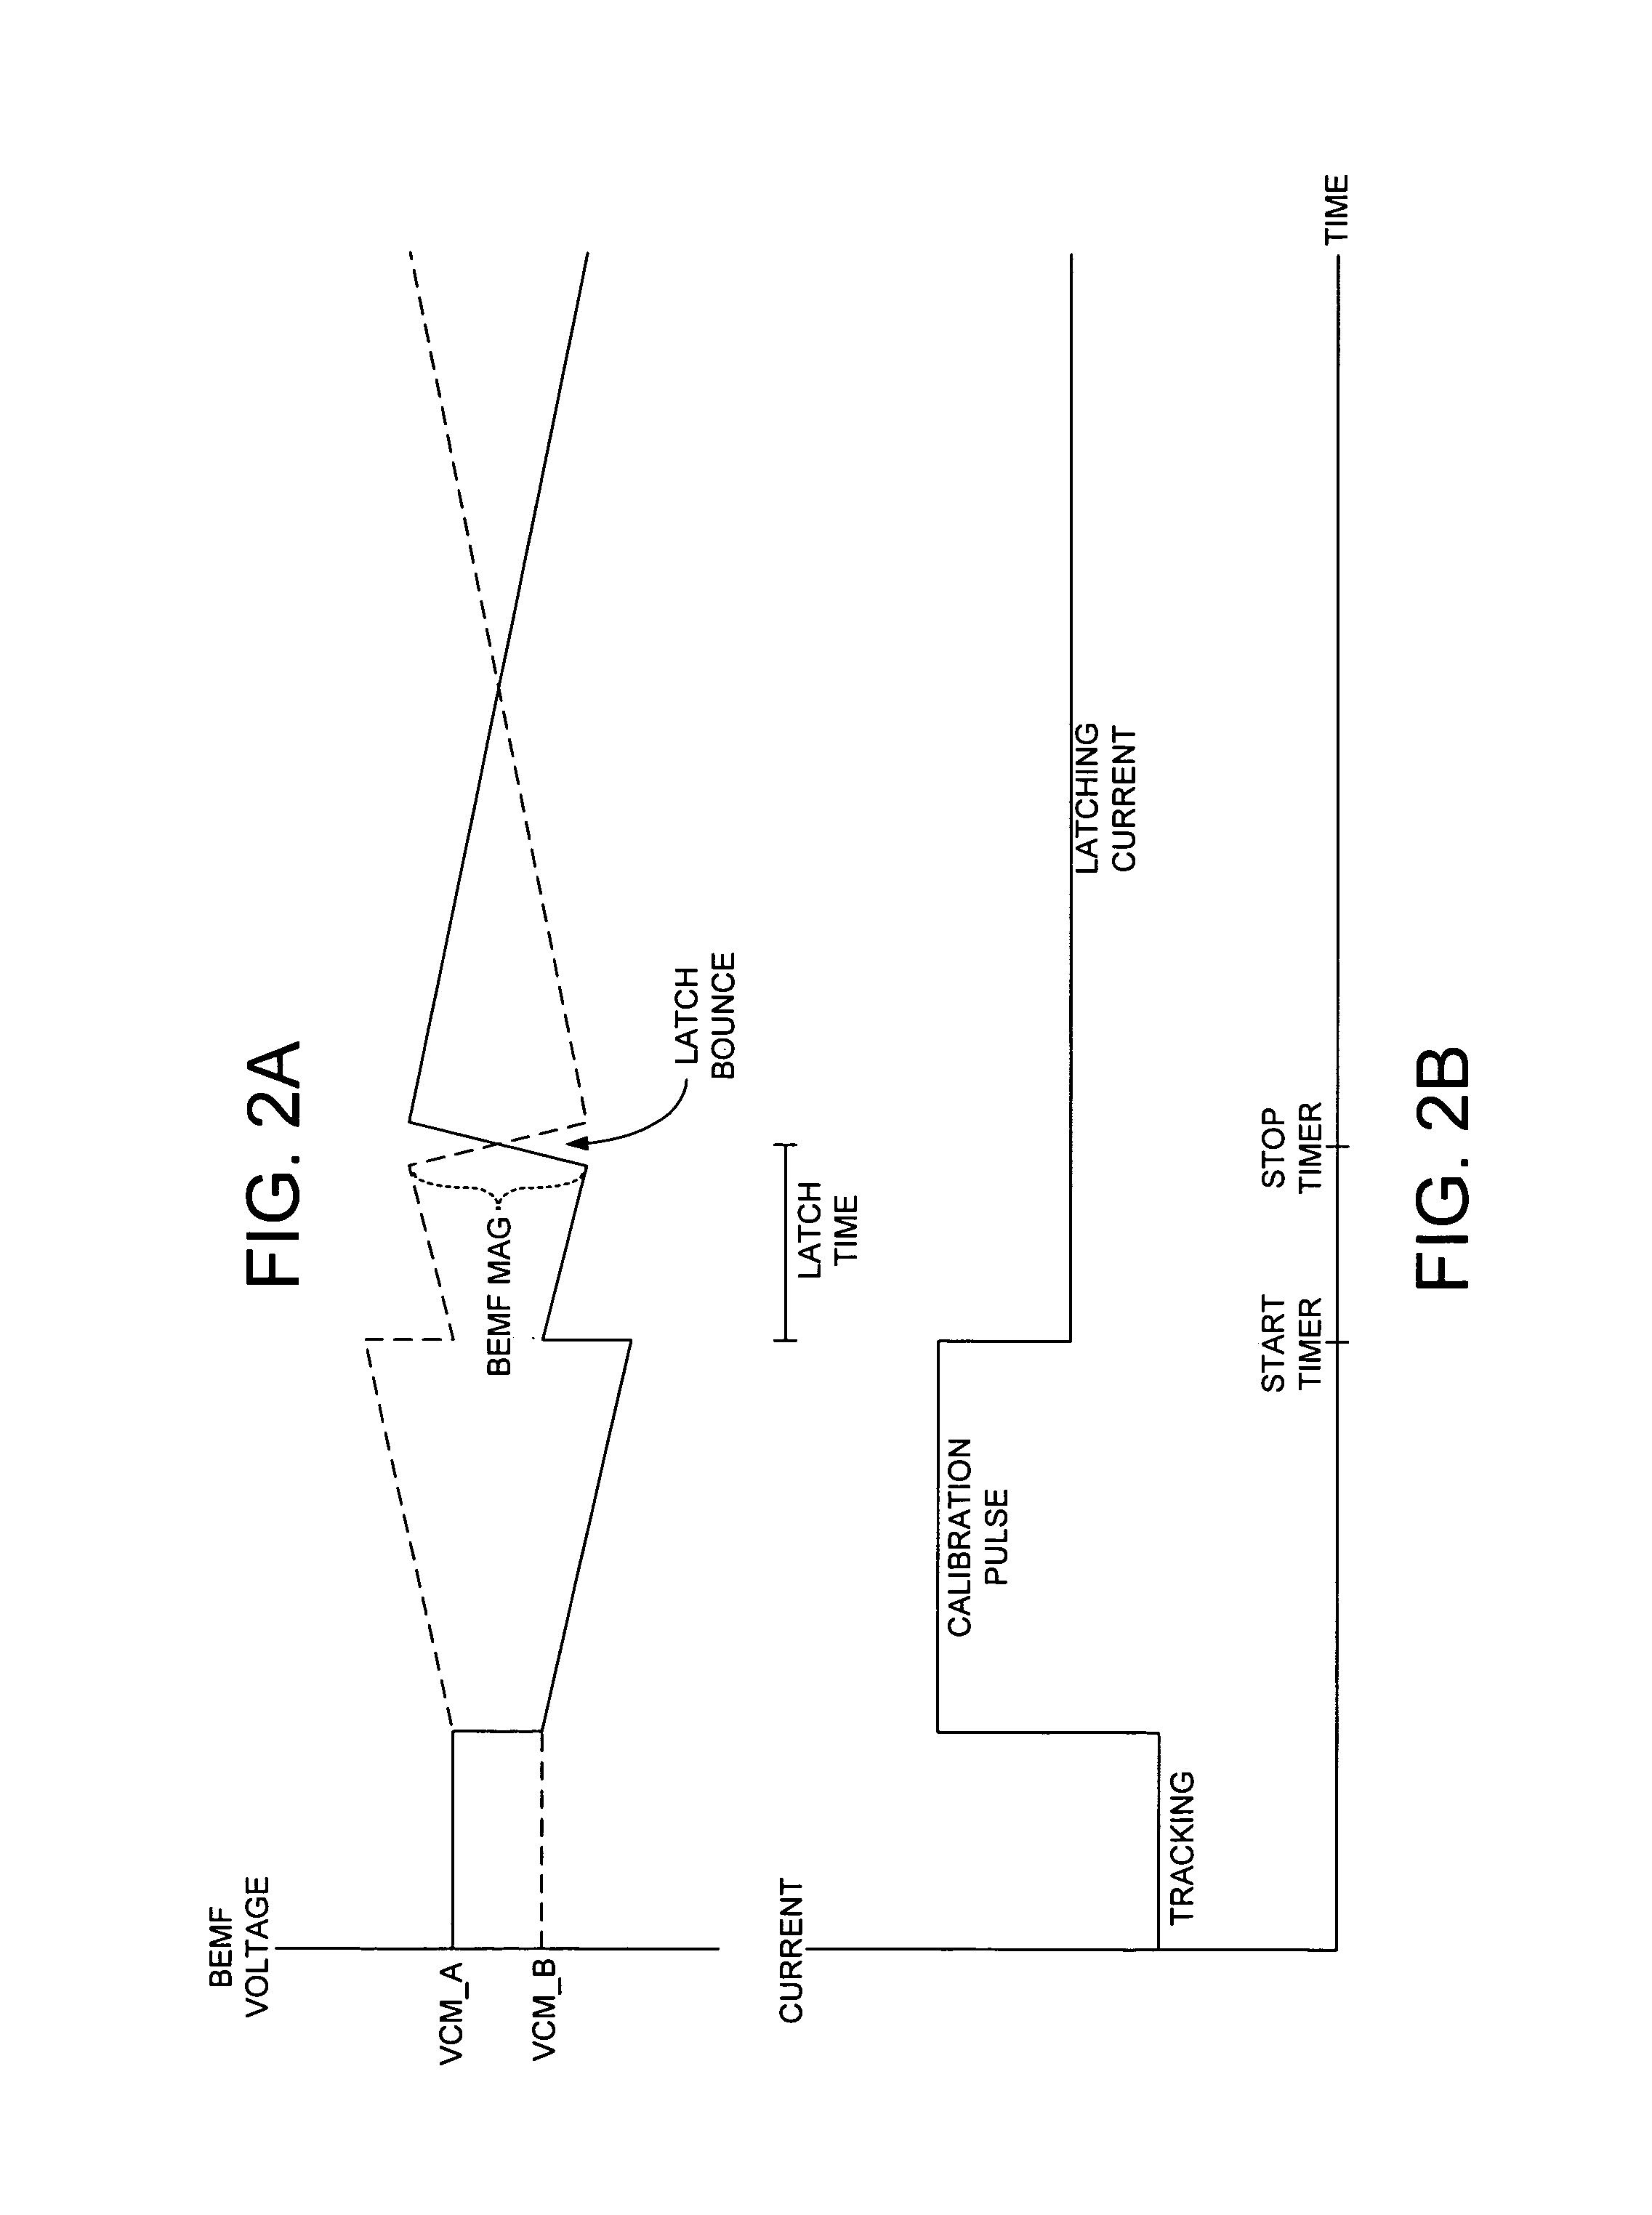 Disk drive employing a calibrated brake pulse to reduce acoustic noise when latching an actuator arm